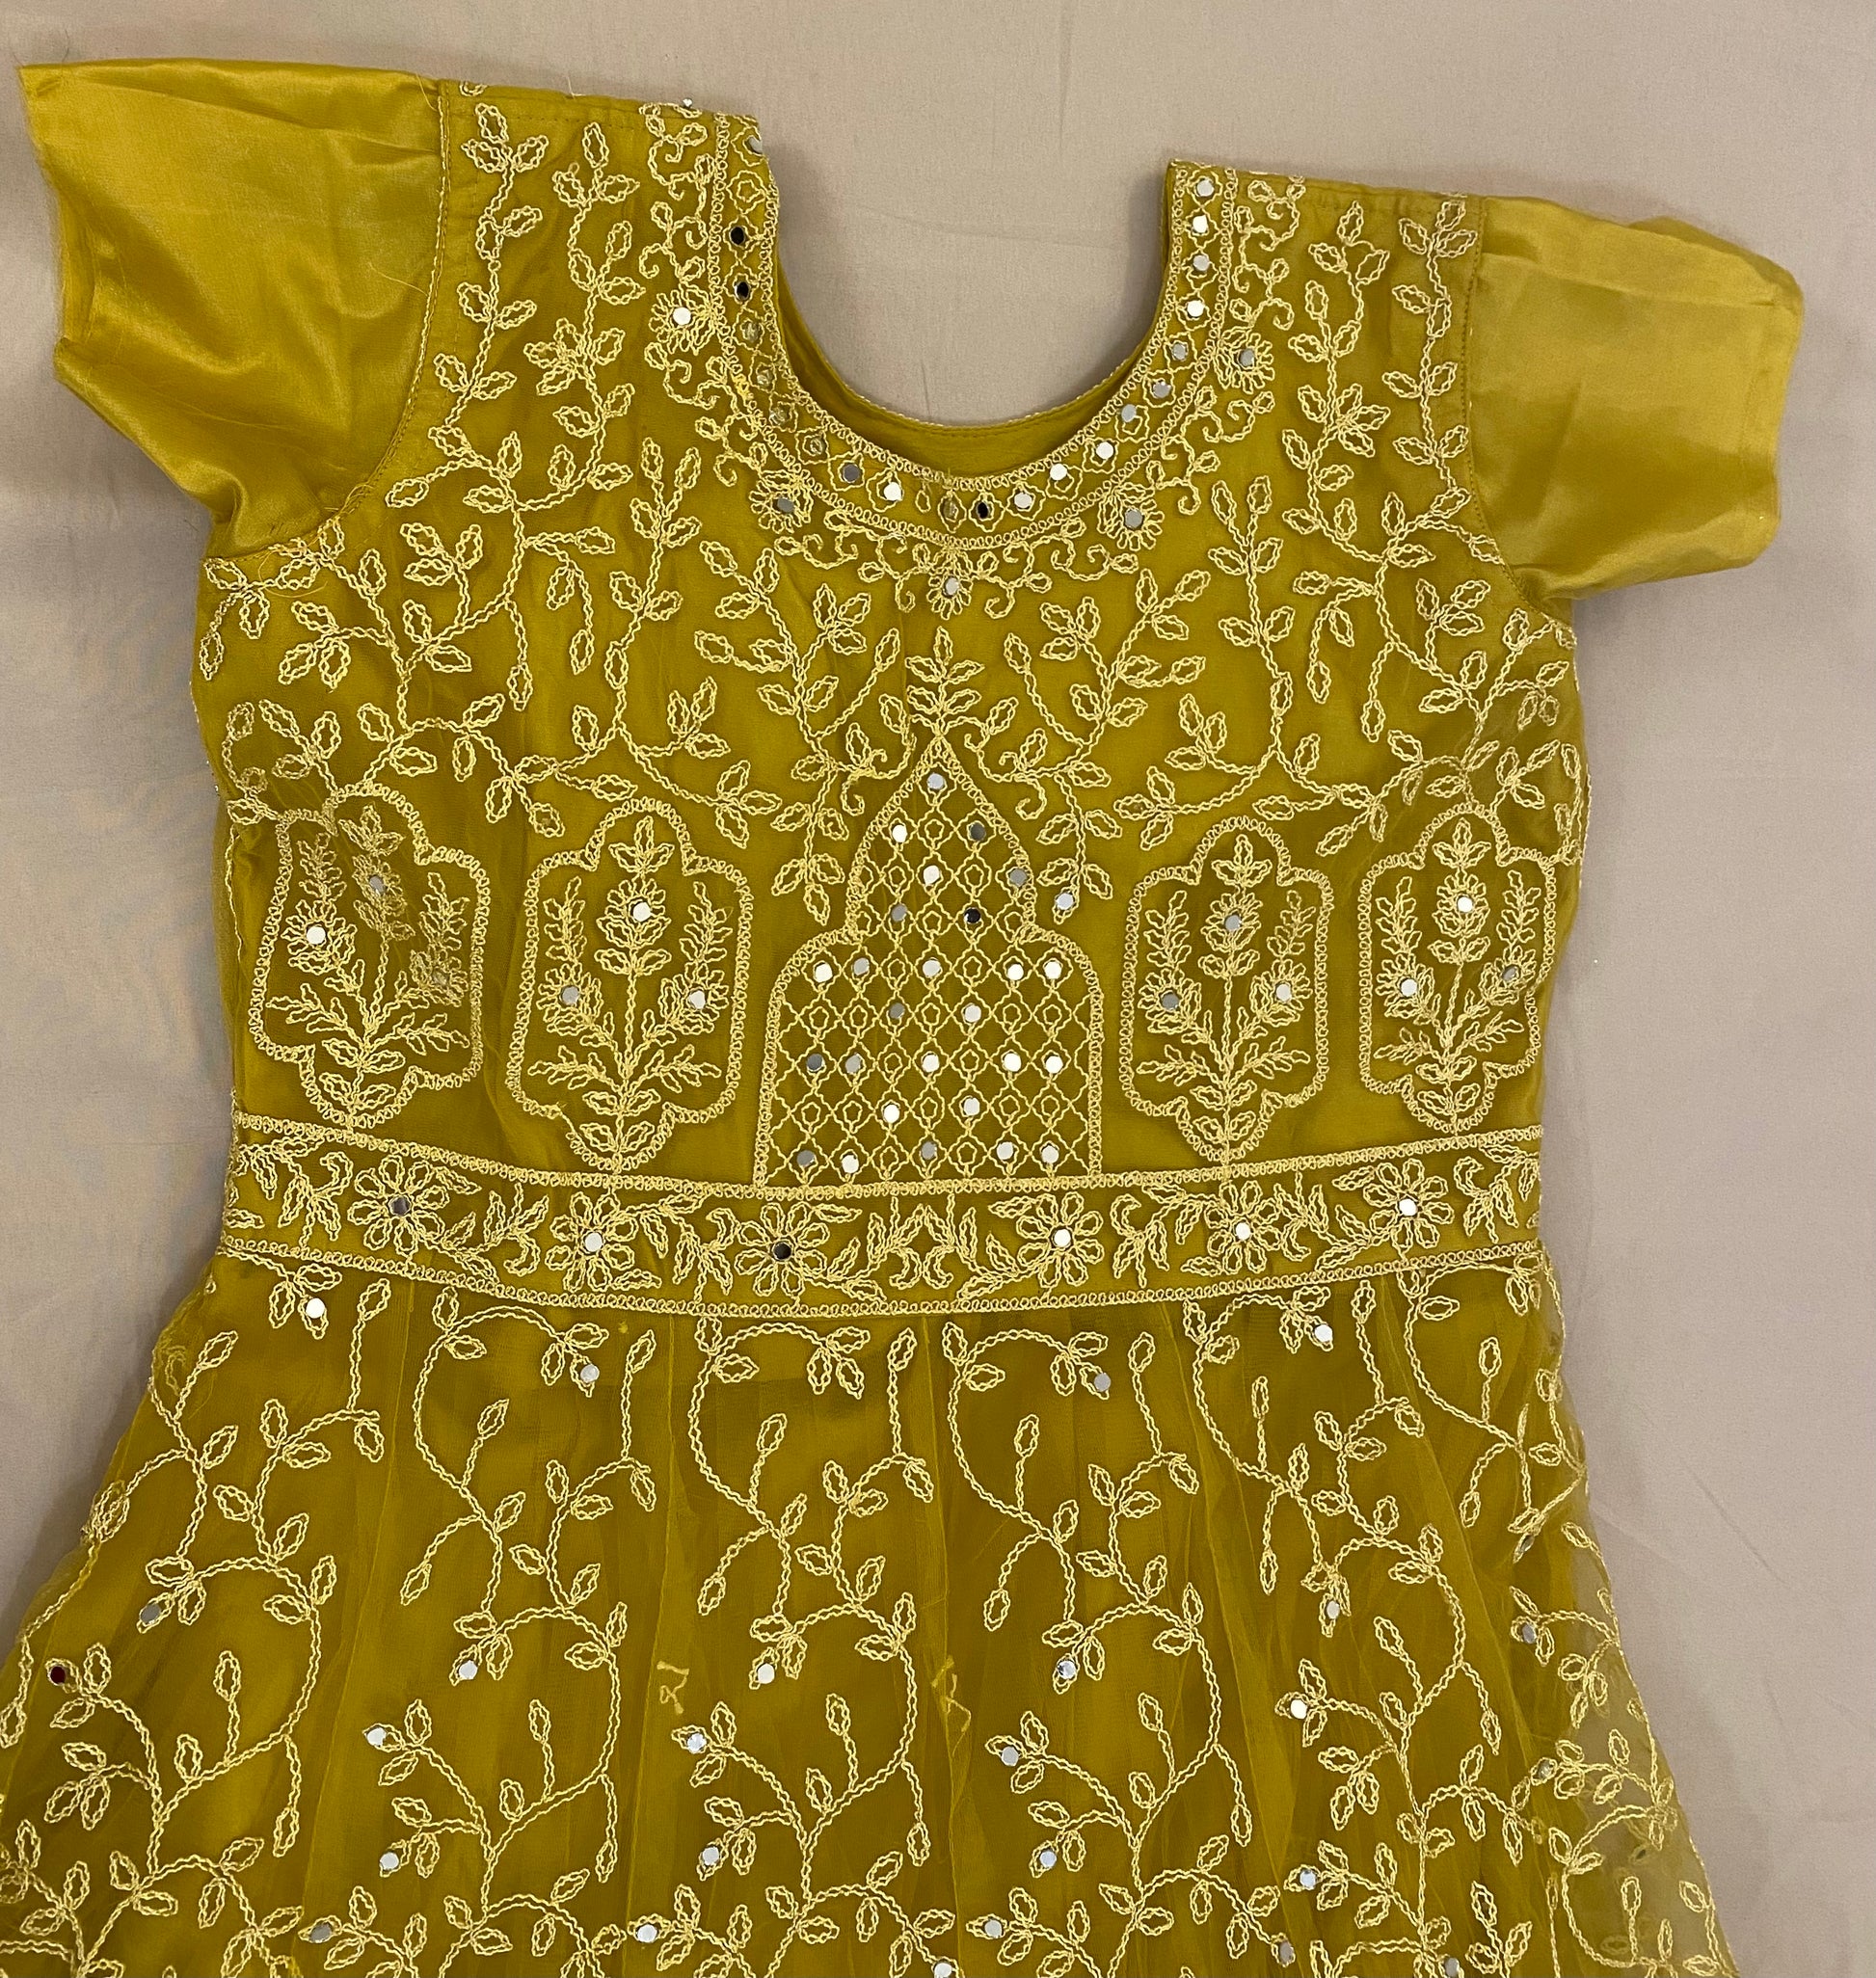 Traditional Indian Kurtis in Williams